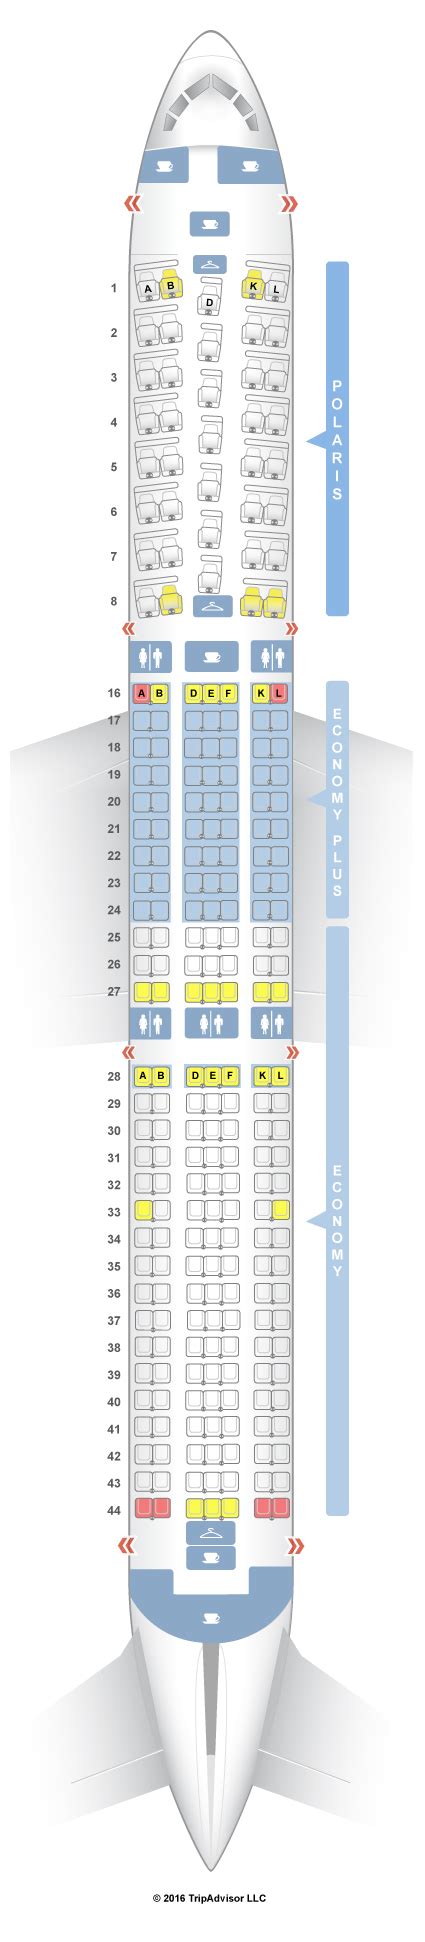 boeing 767-400 seat map united